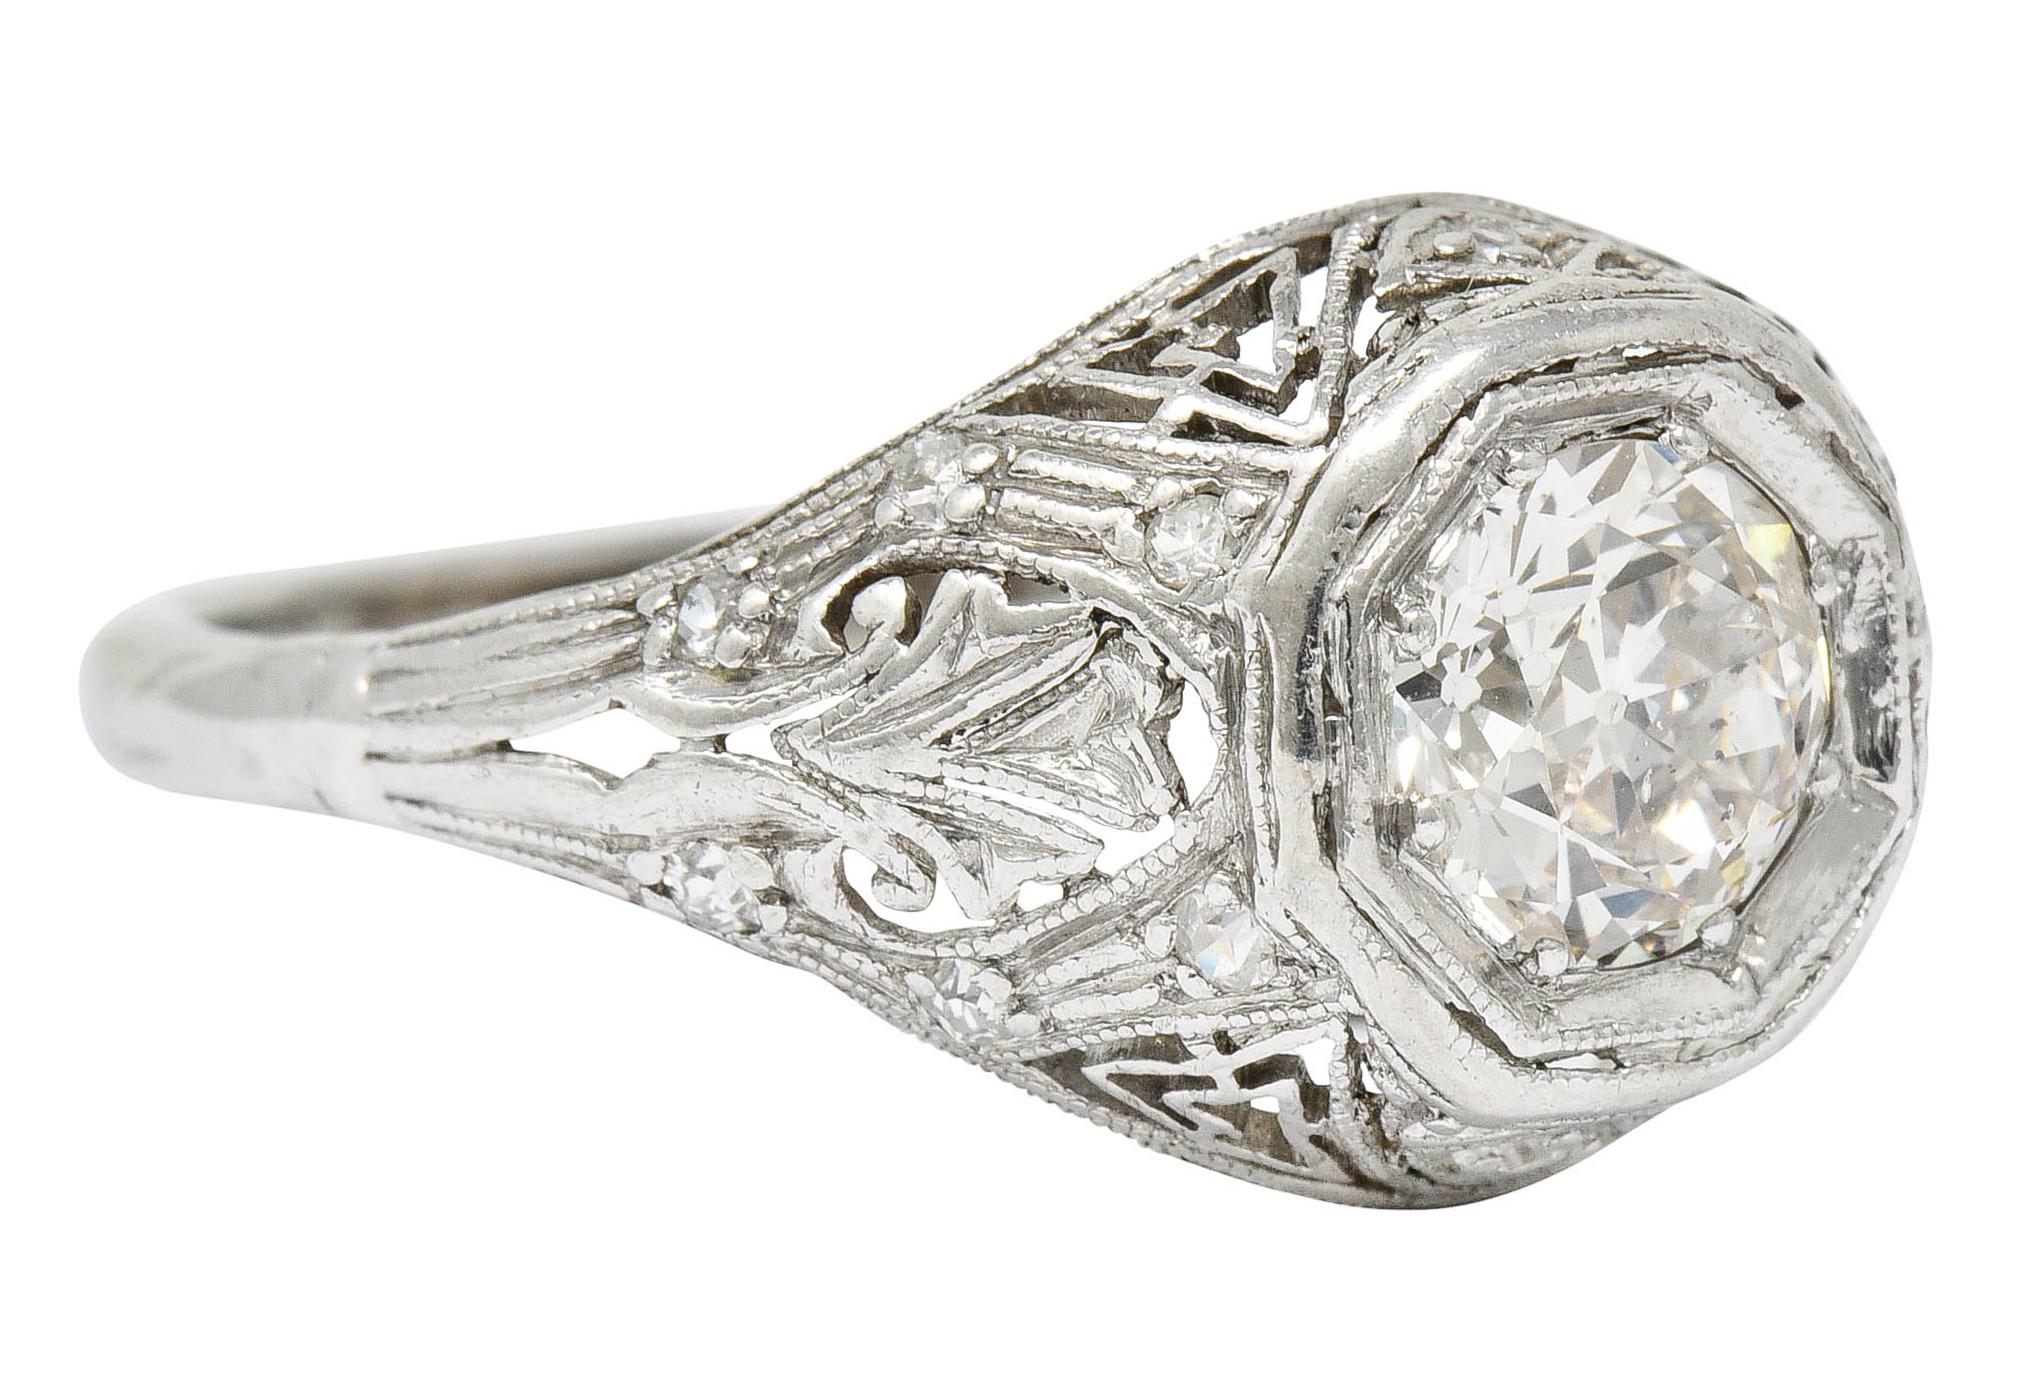 Centering an old European cut diamond weighing approximately 0.60 carat; K with SI clarity

Set low in an octagonal head of an intricately pierced mounting featuring foliate shoulders and Greek key design

Accented by single cut diamonds weighing